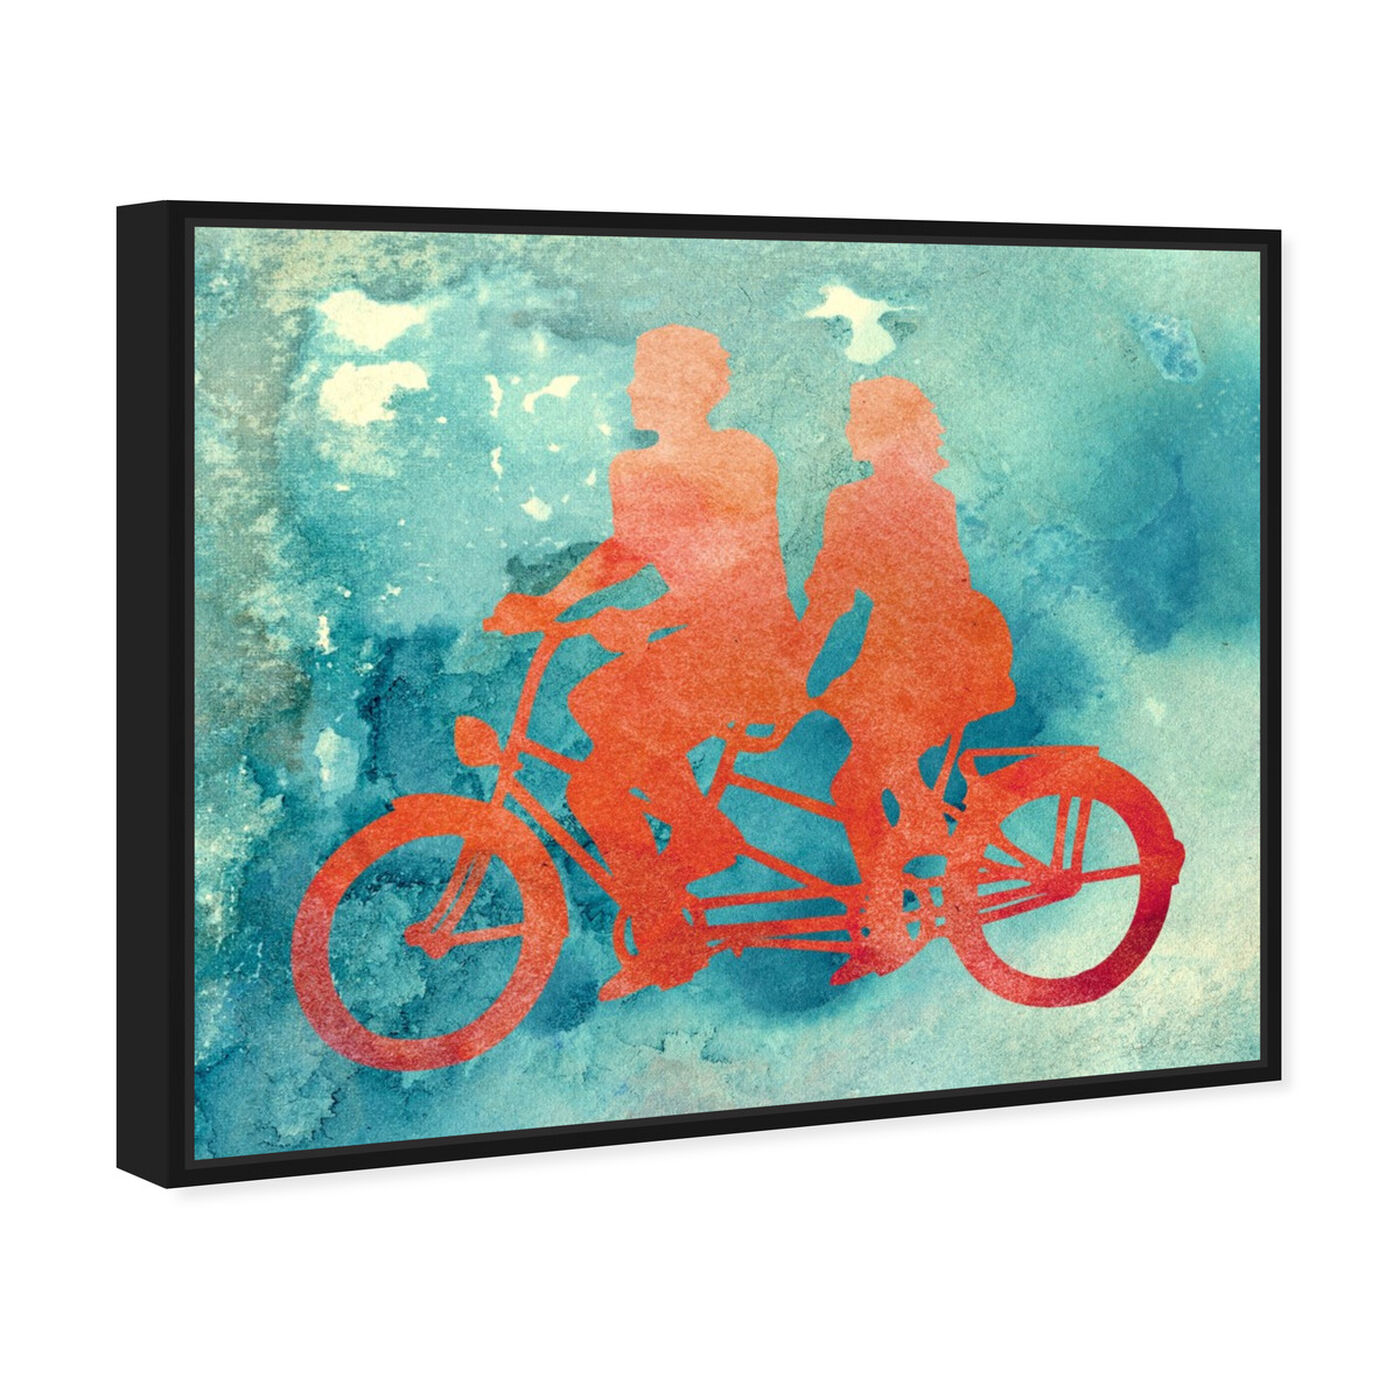 Angled view of La Bicyclette featuring transportation and bicycles art.